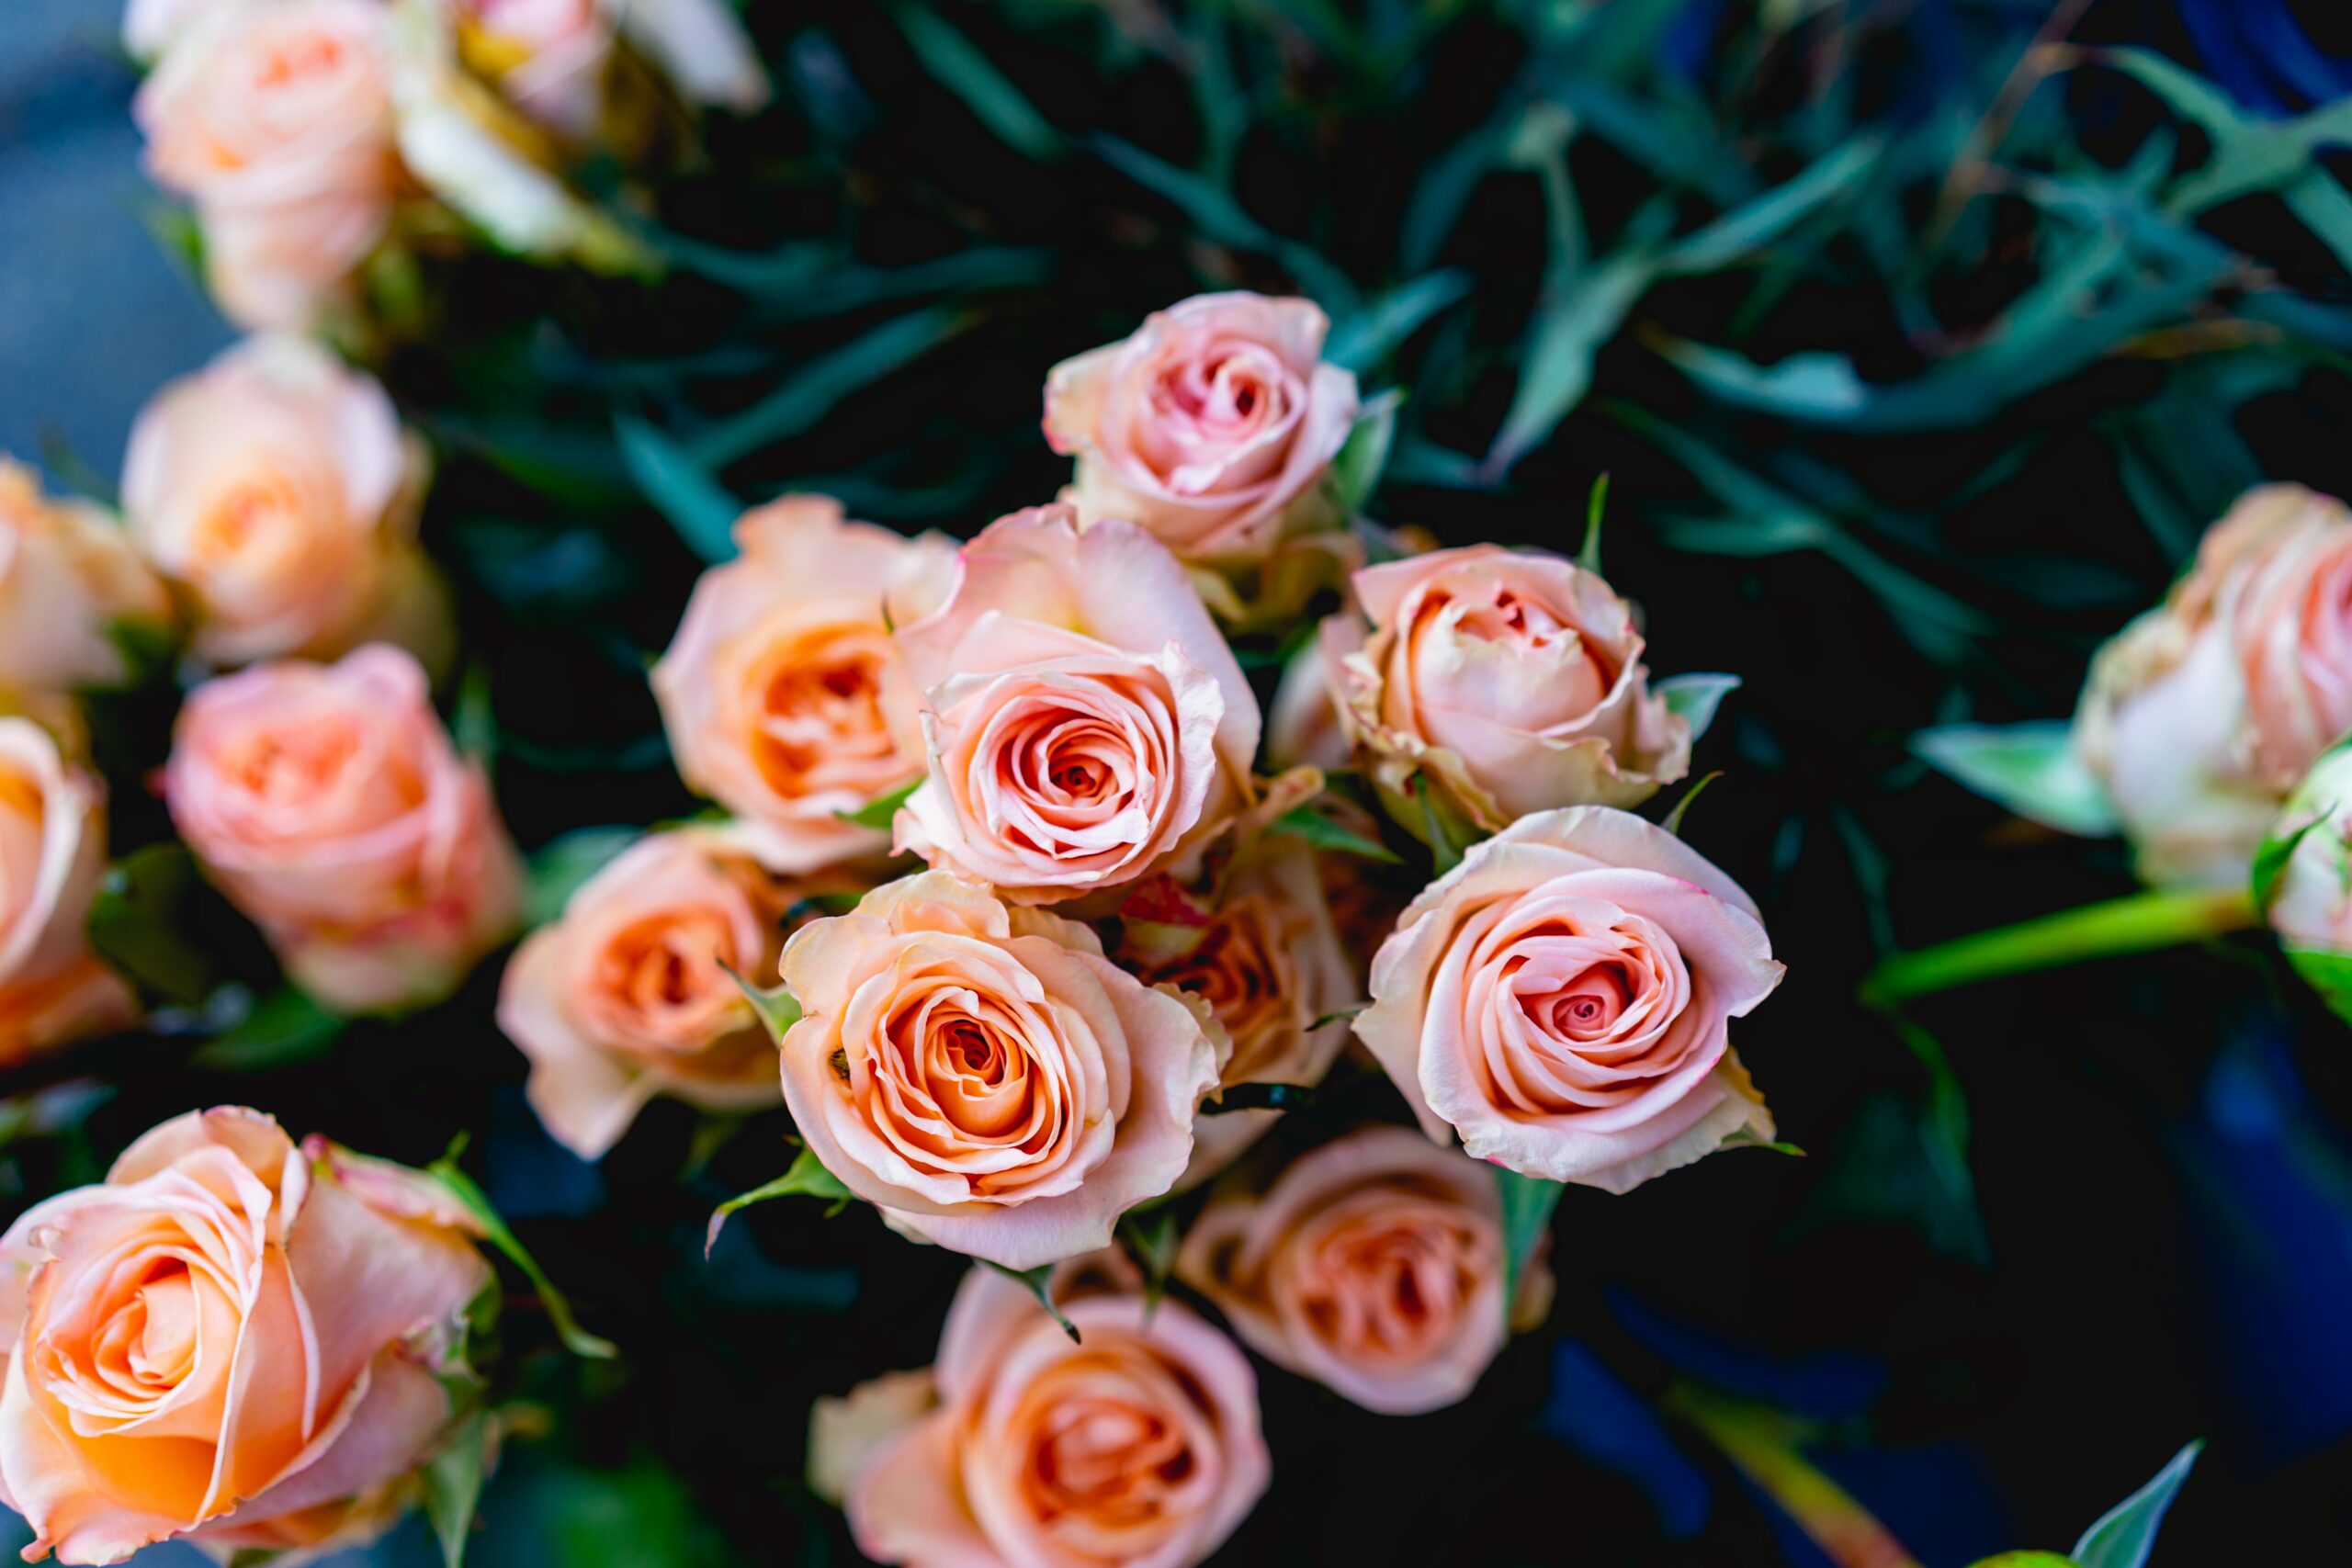 Bunch of fresh peach roses with dark green stems